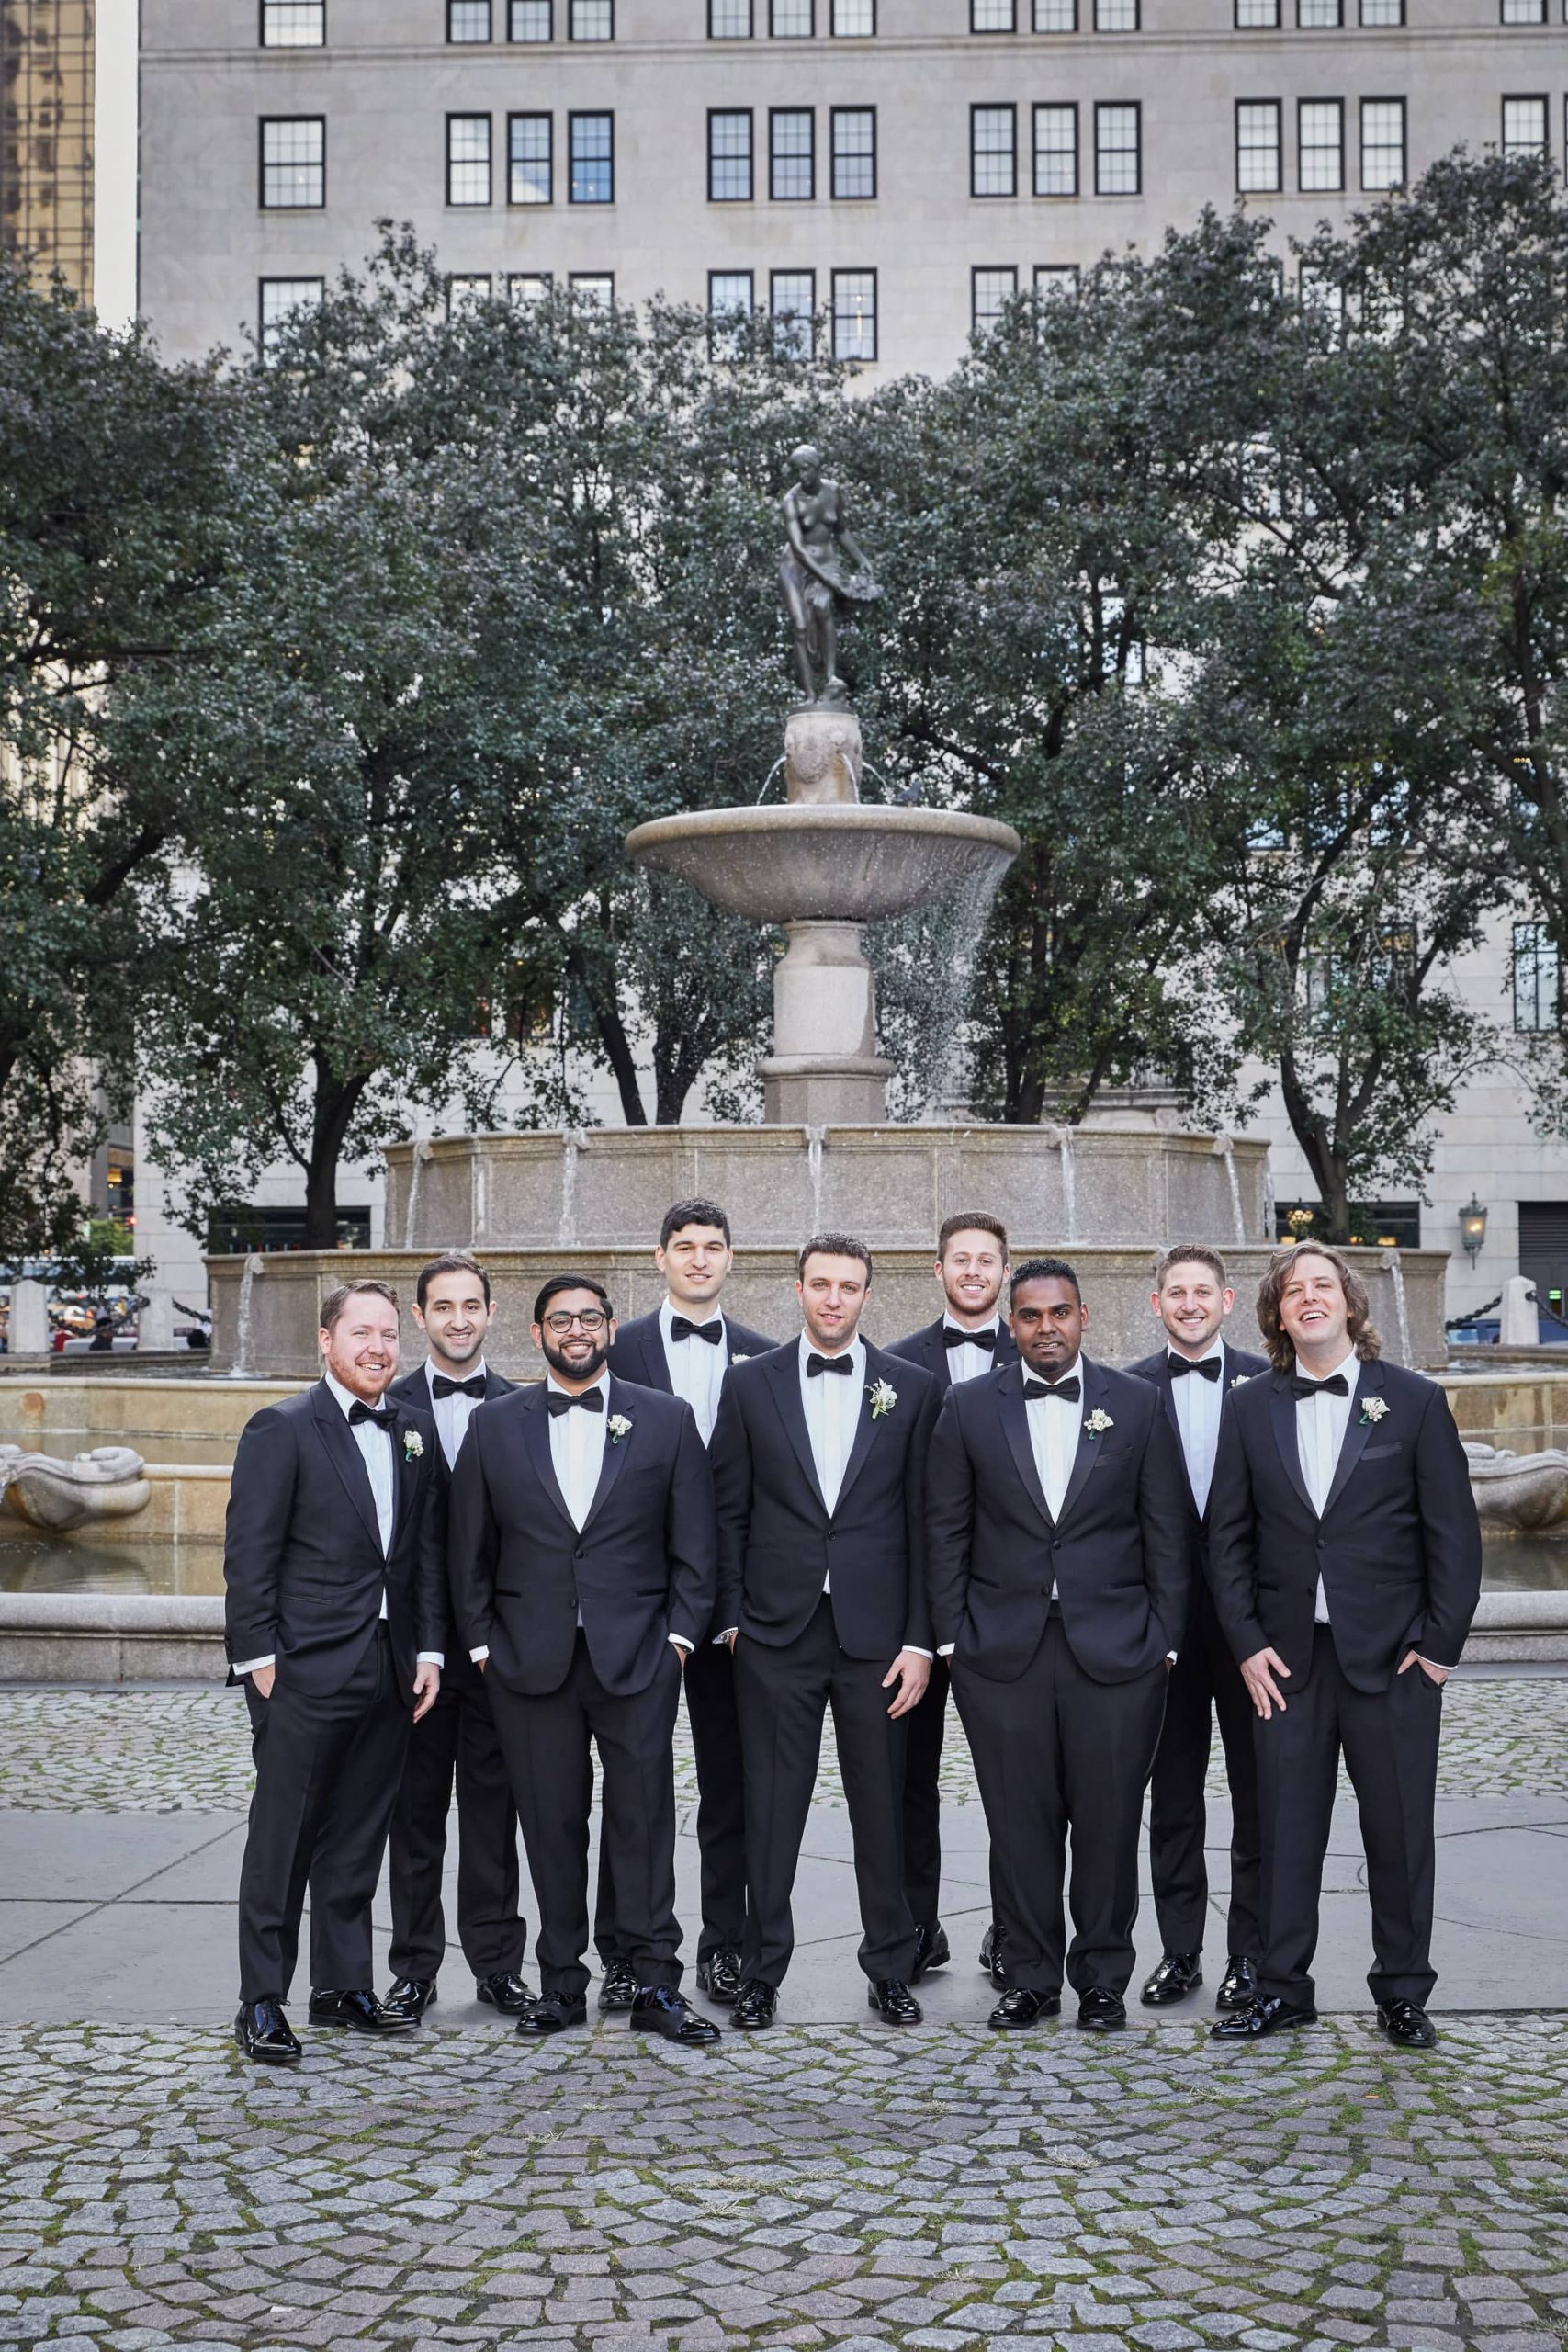 Groom and groomsmen at this classic autumn wedding at The Plaza in NYC | Photo by Christian Oth Studio